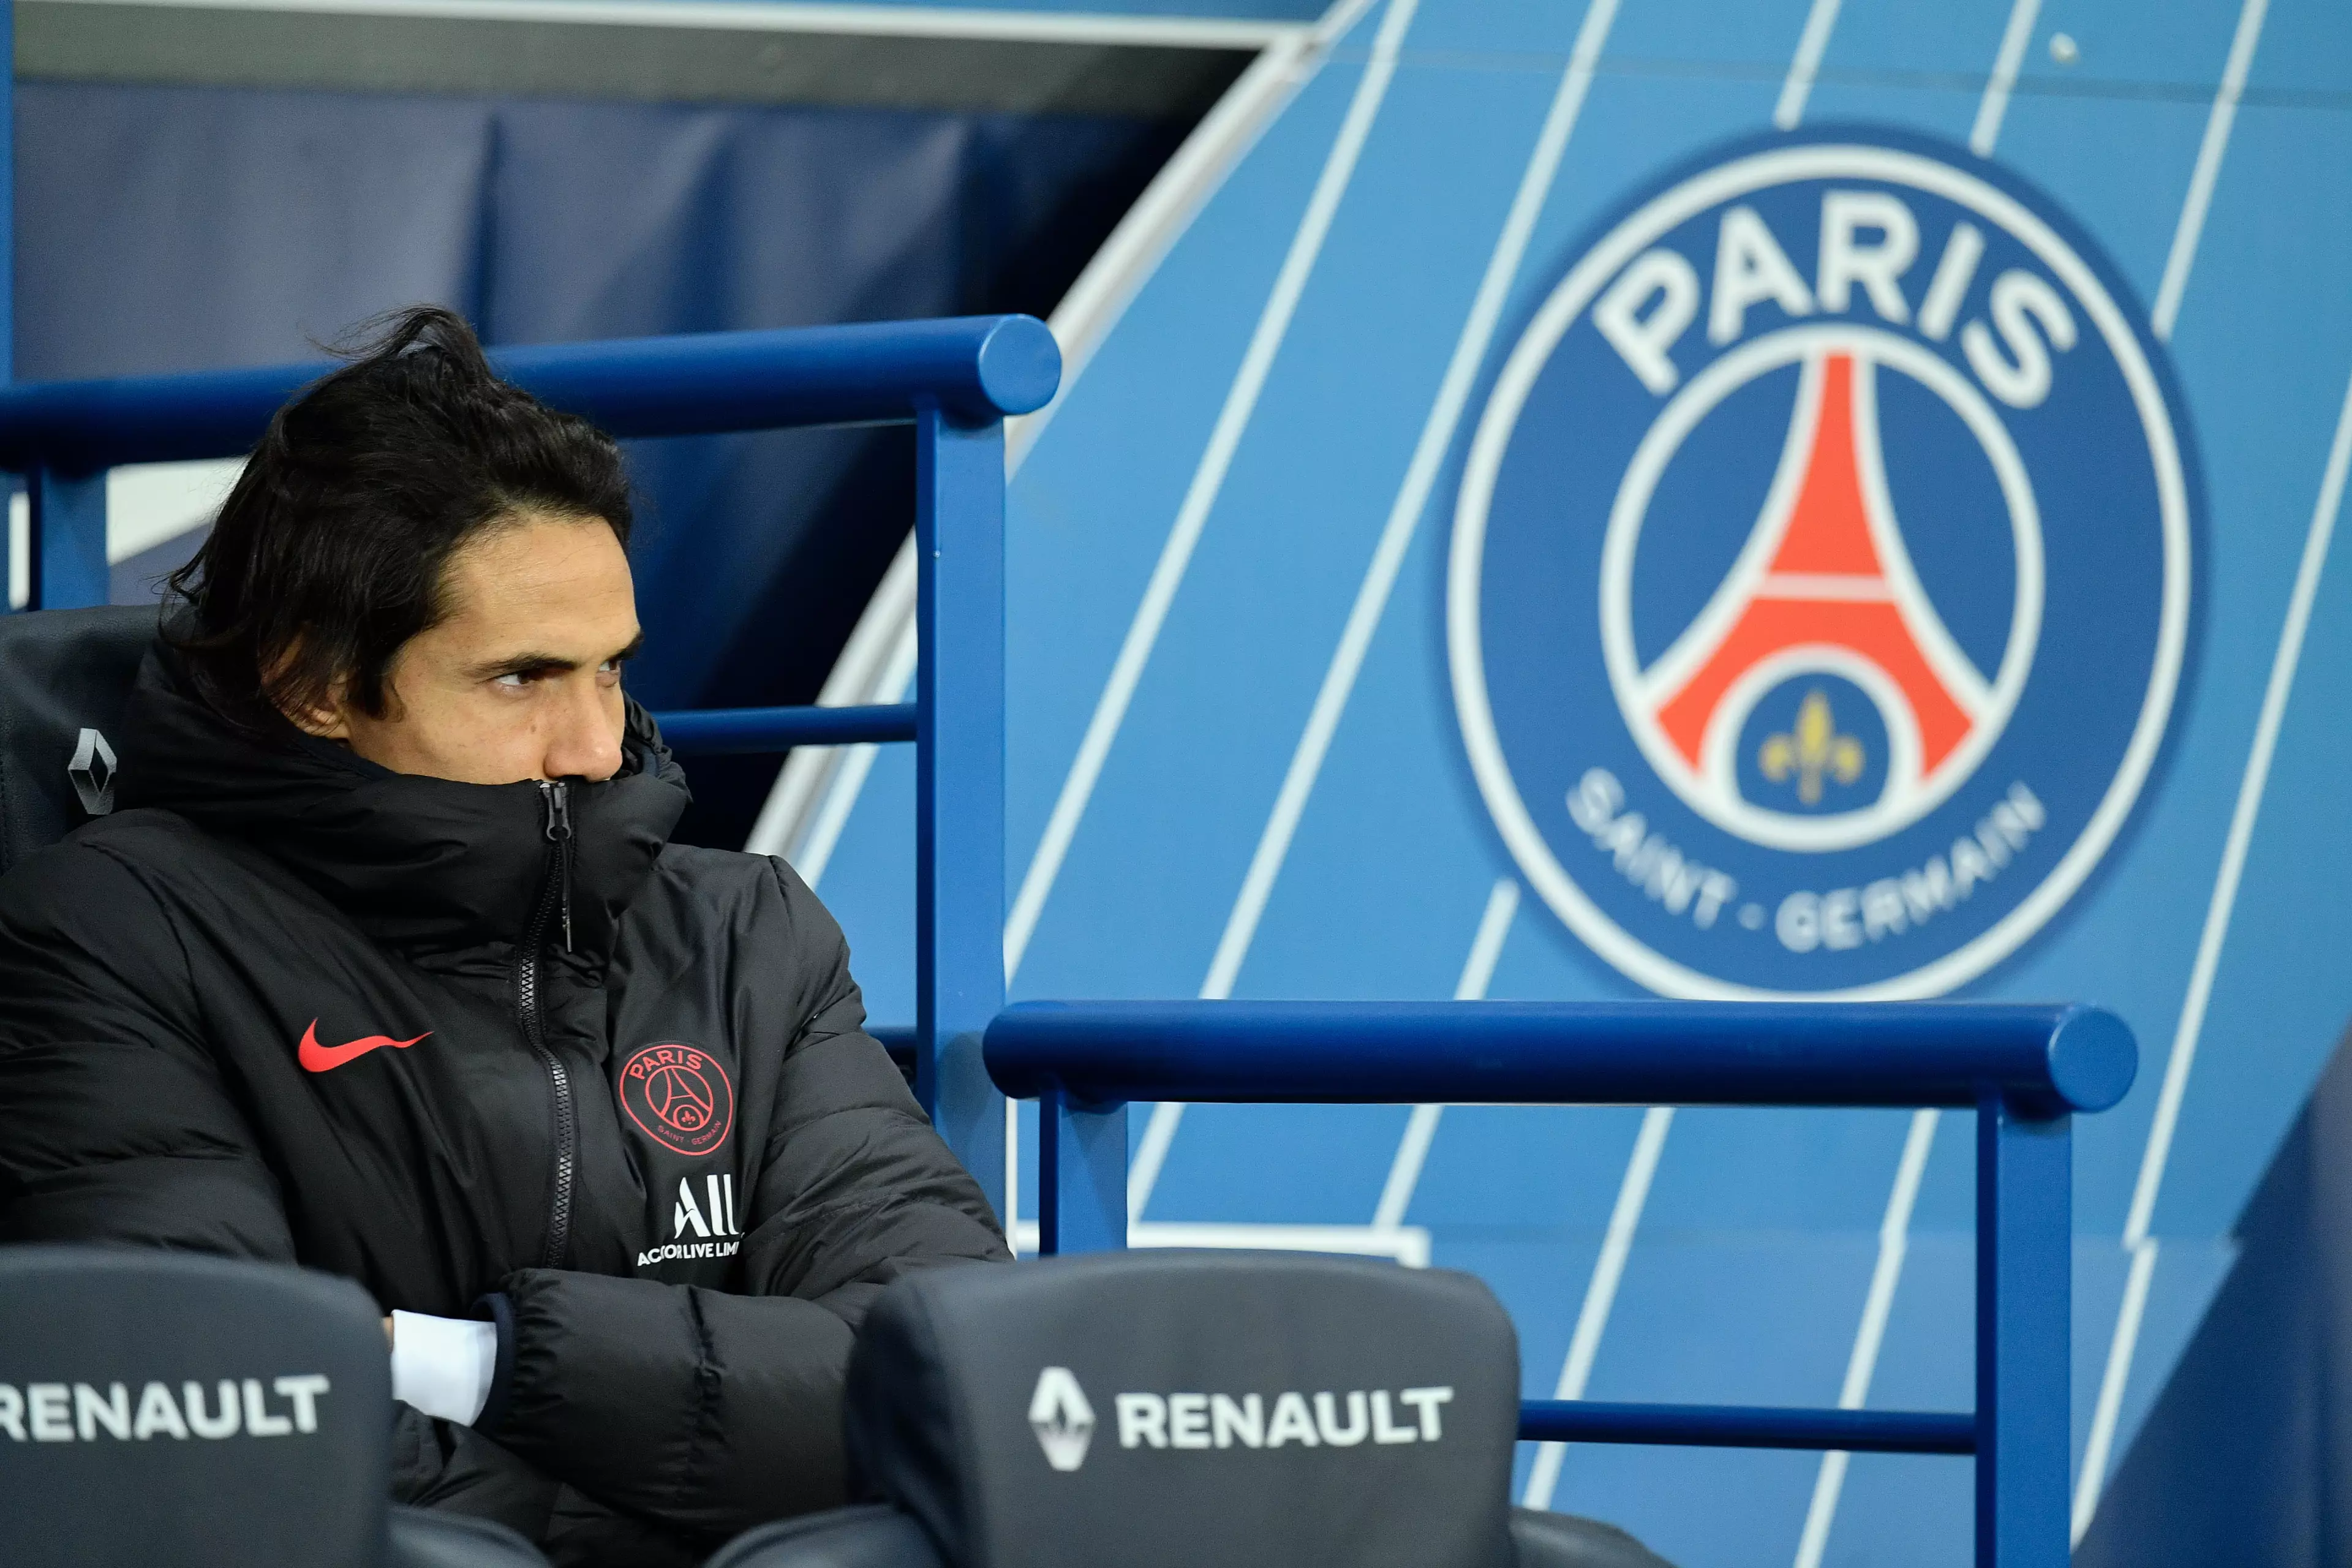 Cavani has spent plenty of time on the bench this season. Image: PA Images